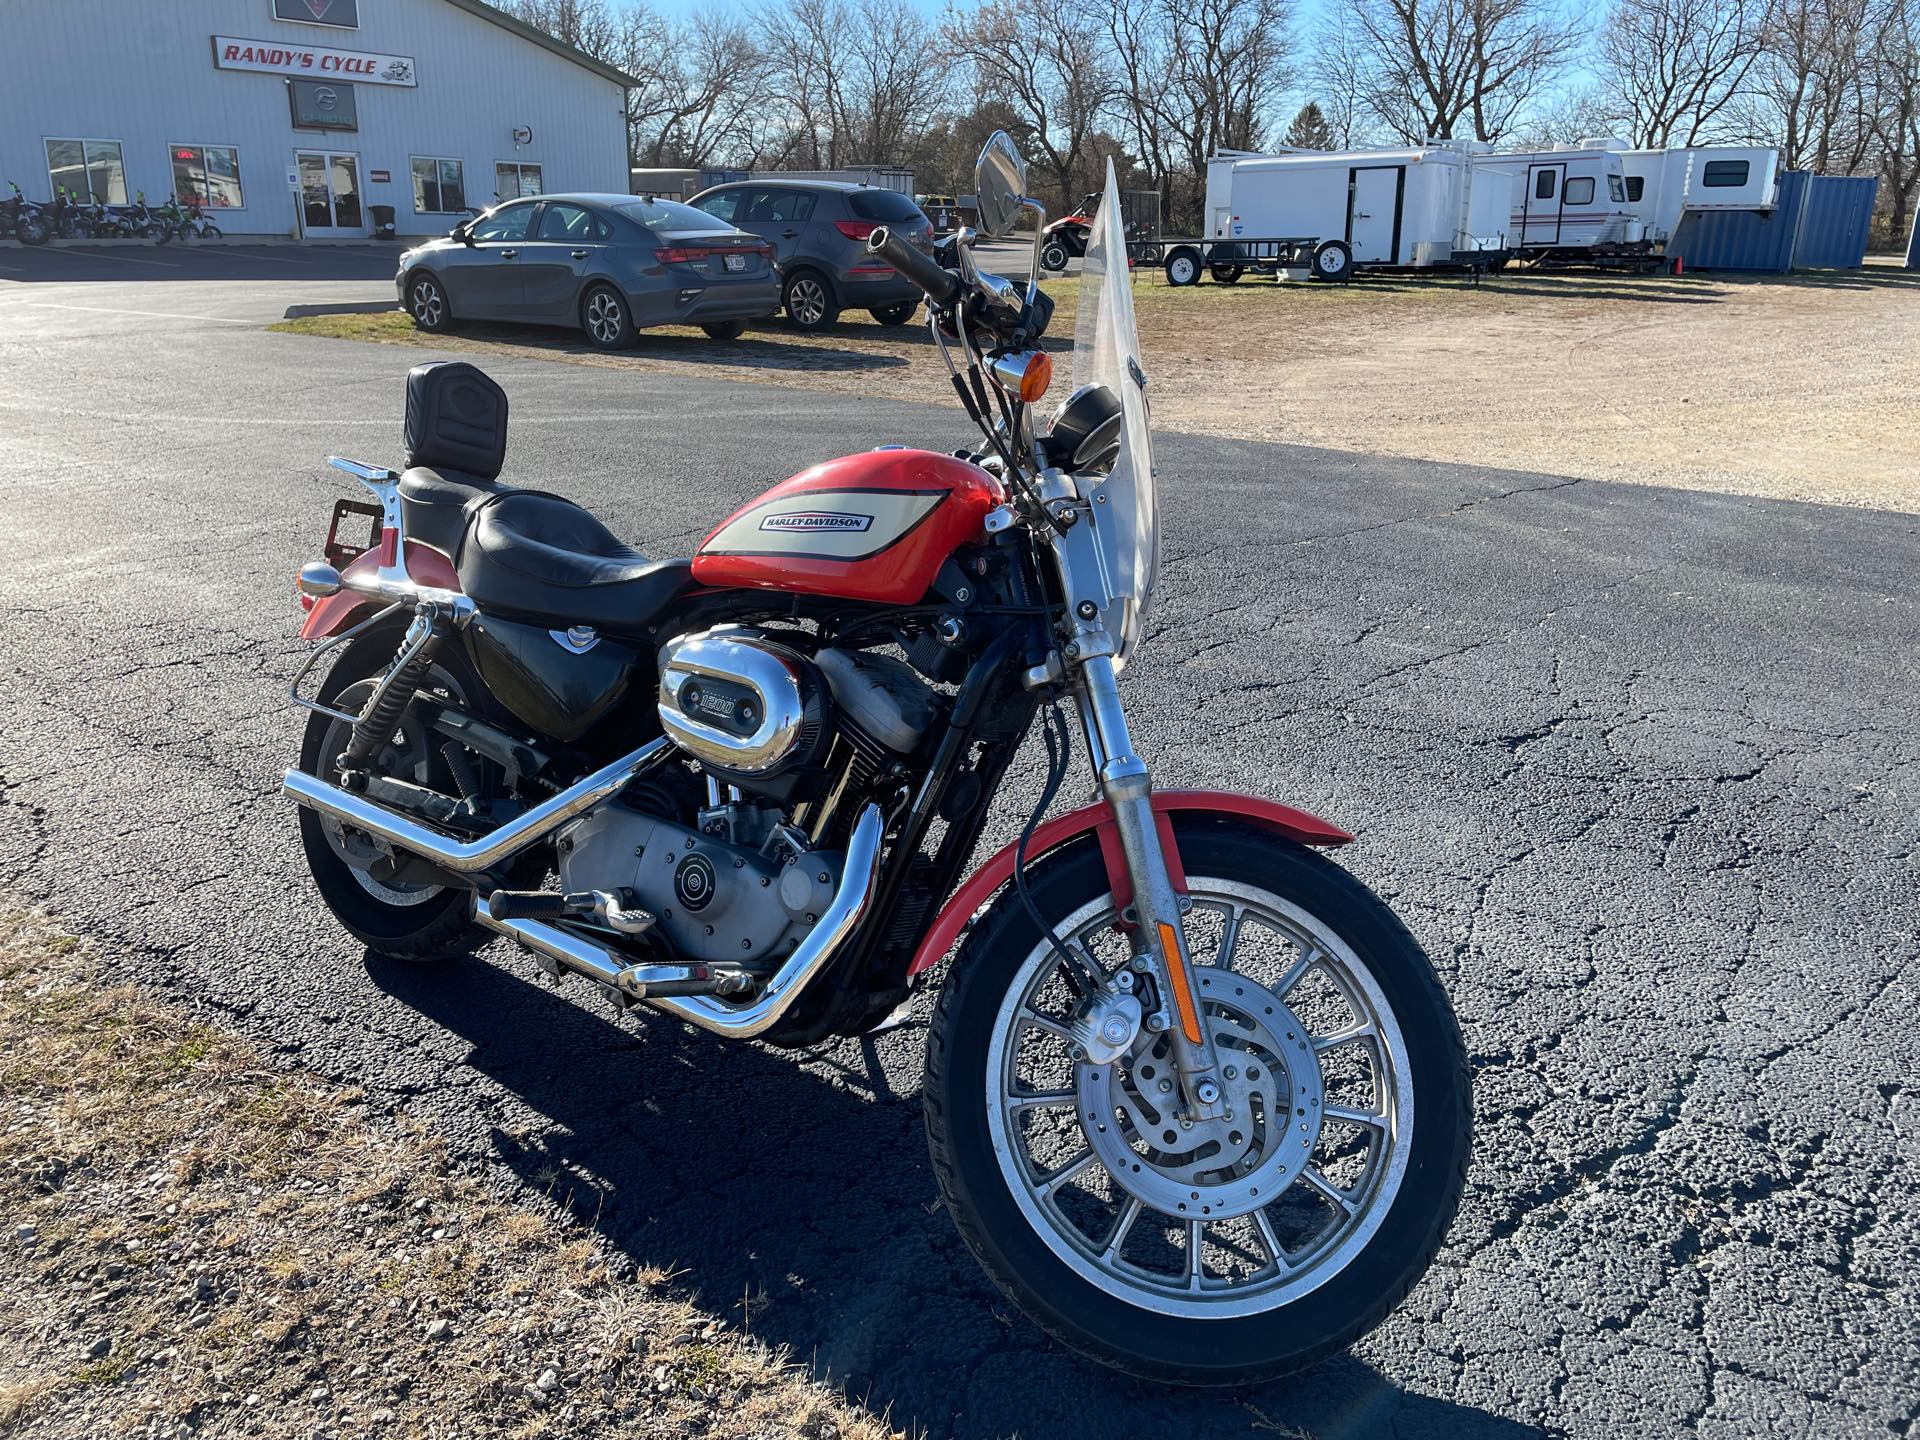 2004 Harley-Davidson Sportster 1200 Roadster at Randy's Cycle